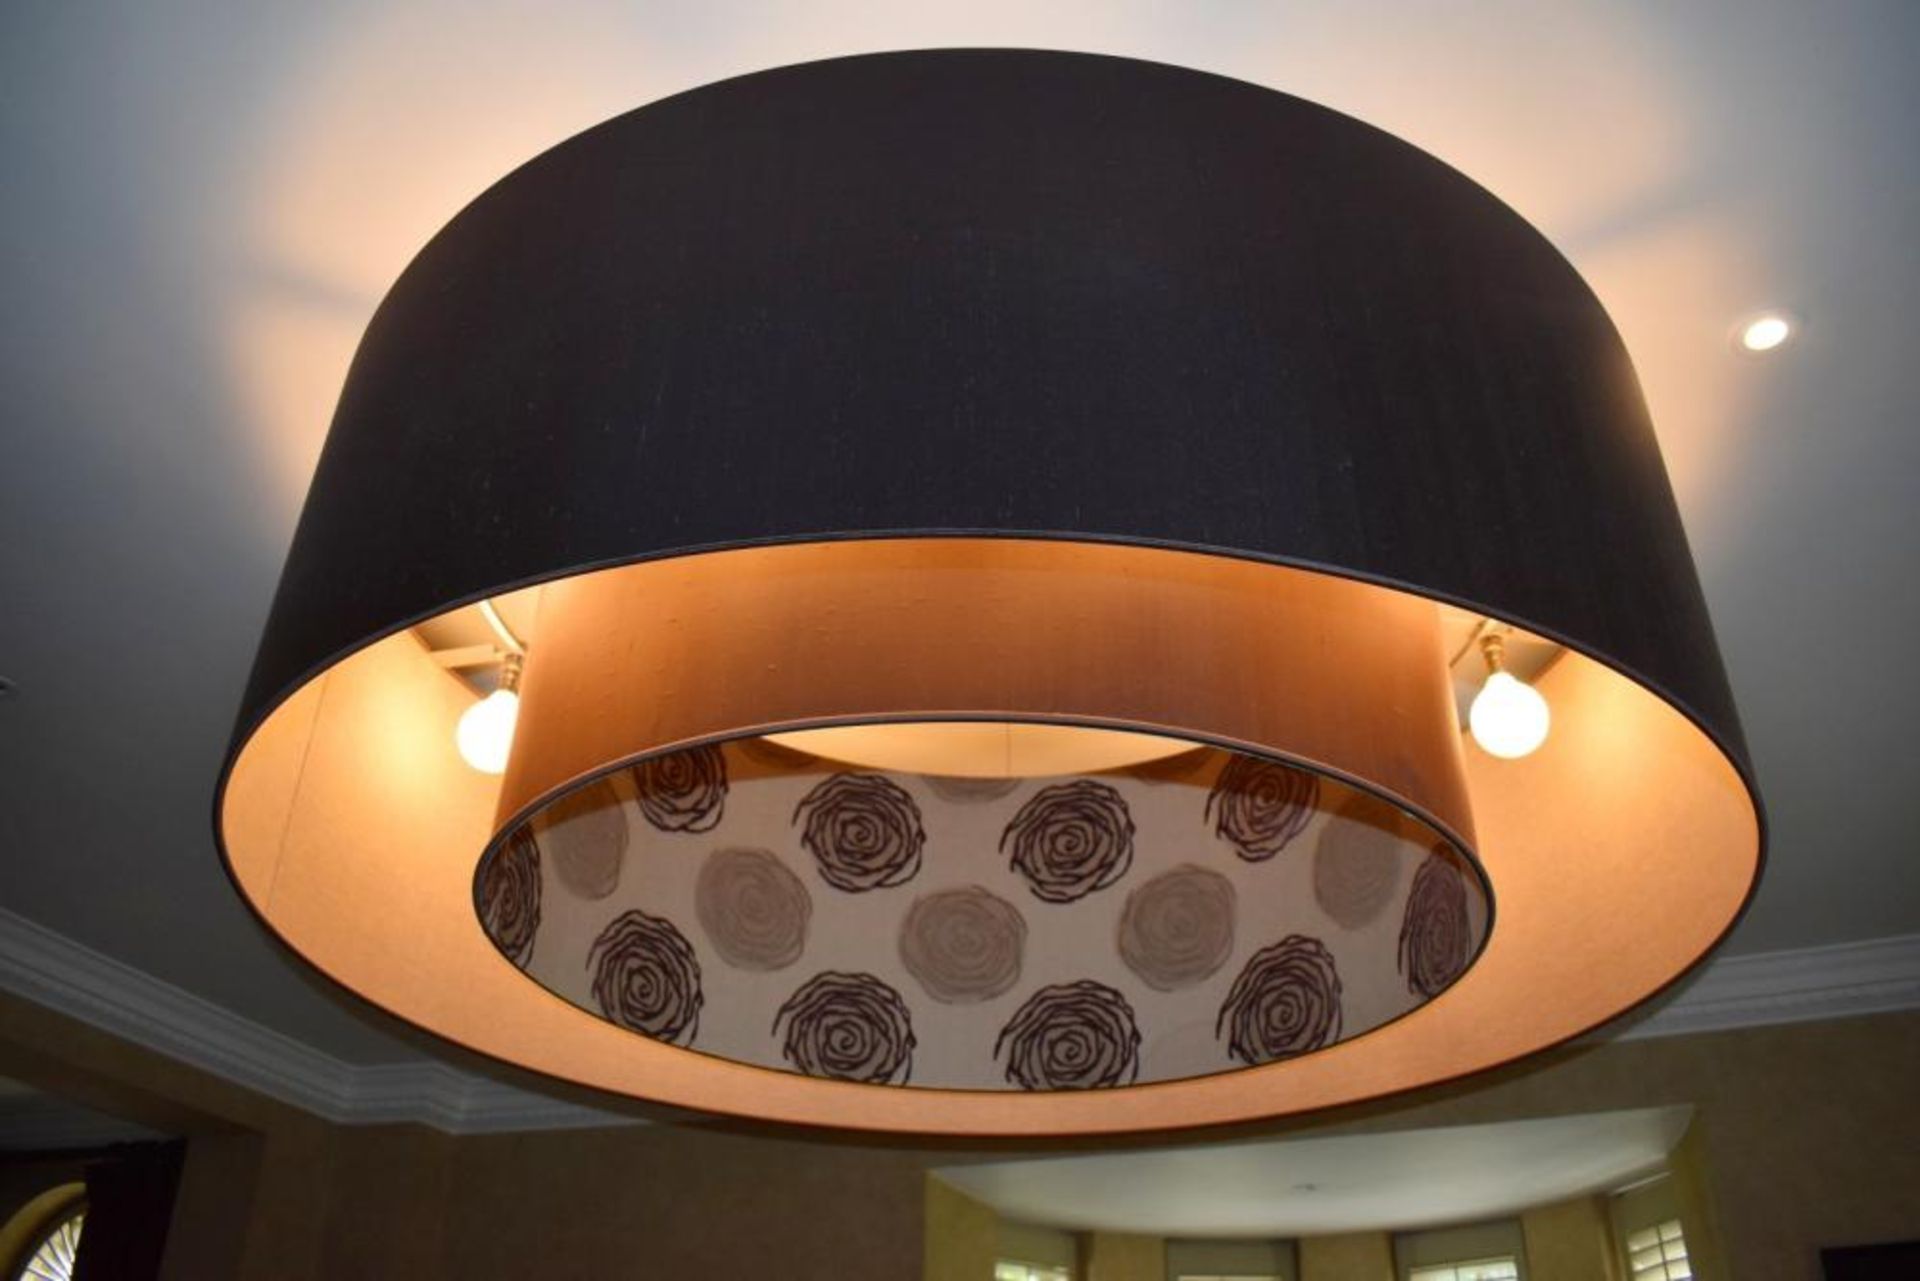 1 x Huge 1.5 Metre Light Fitting Featuring A Double Shade - Dimensions: 150cm Diamter, 50cm Height - Image 3 of 7